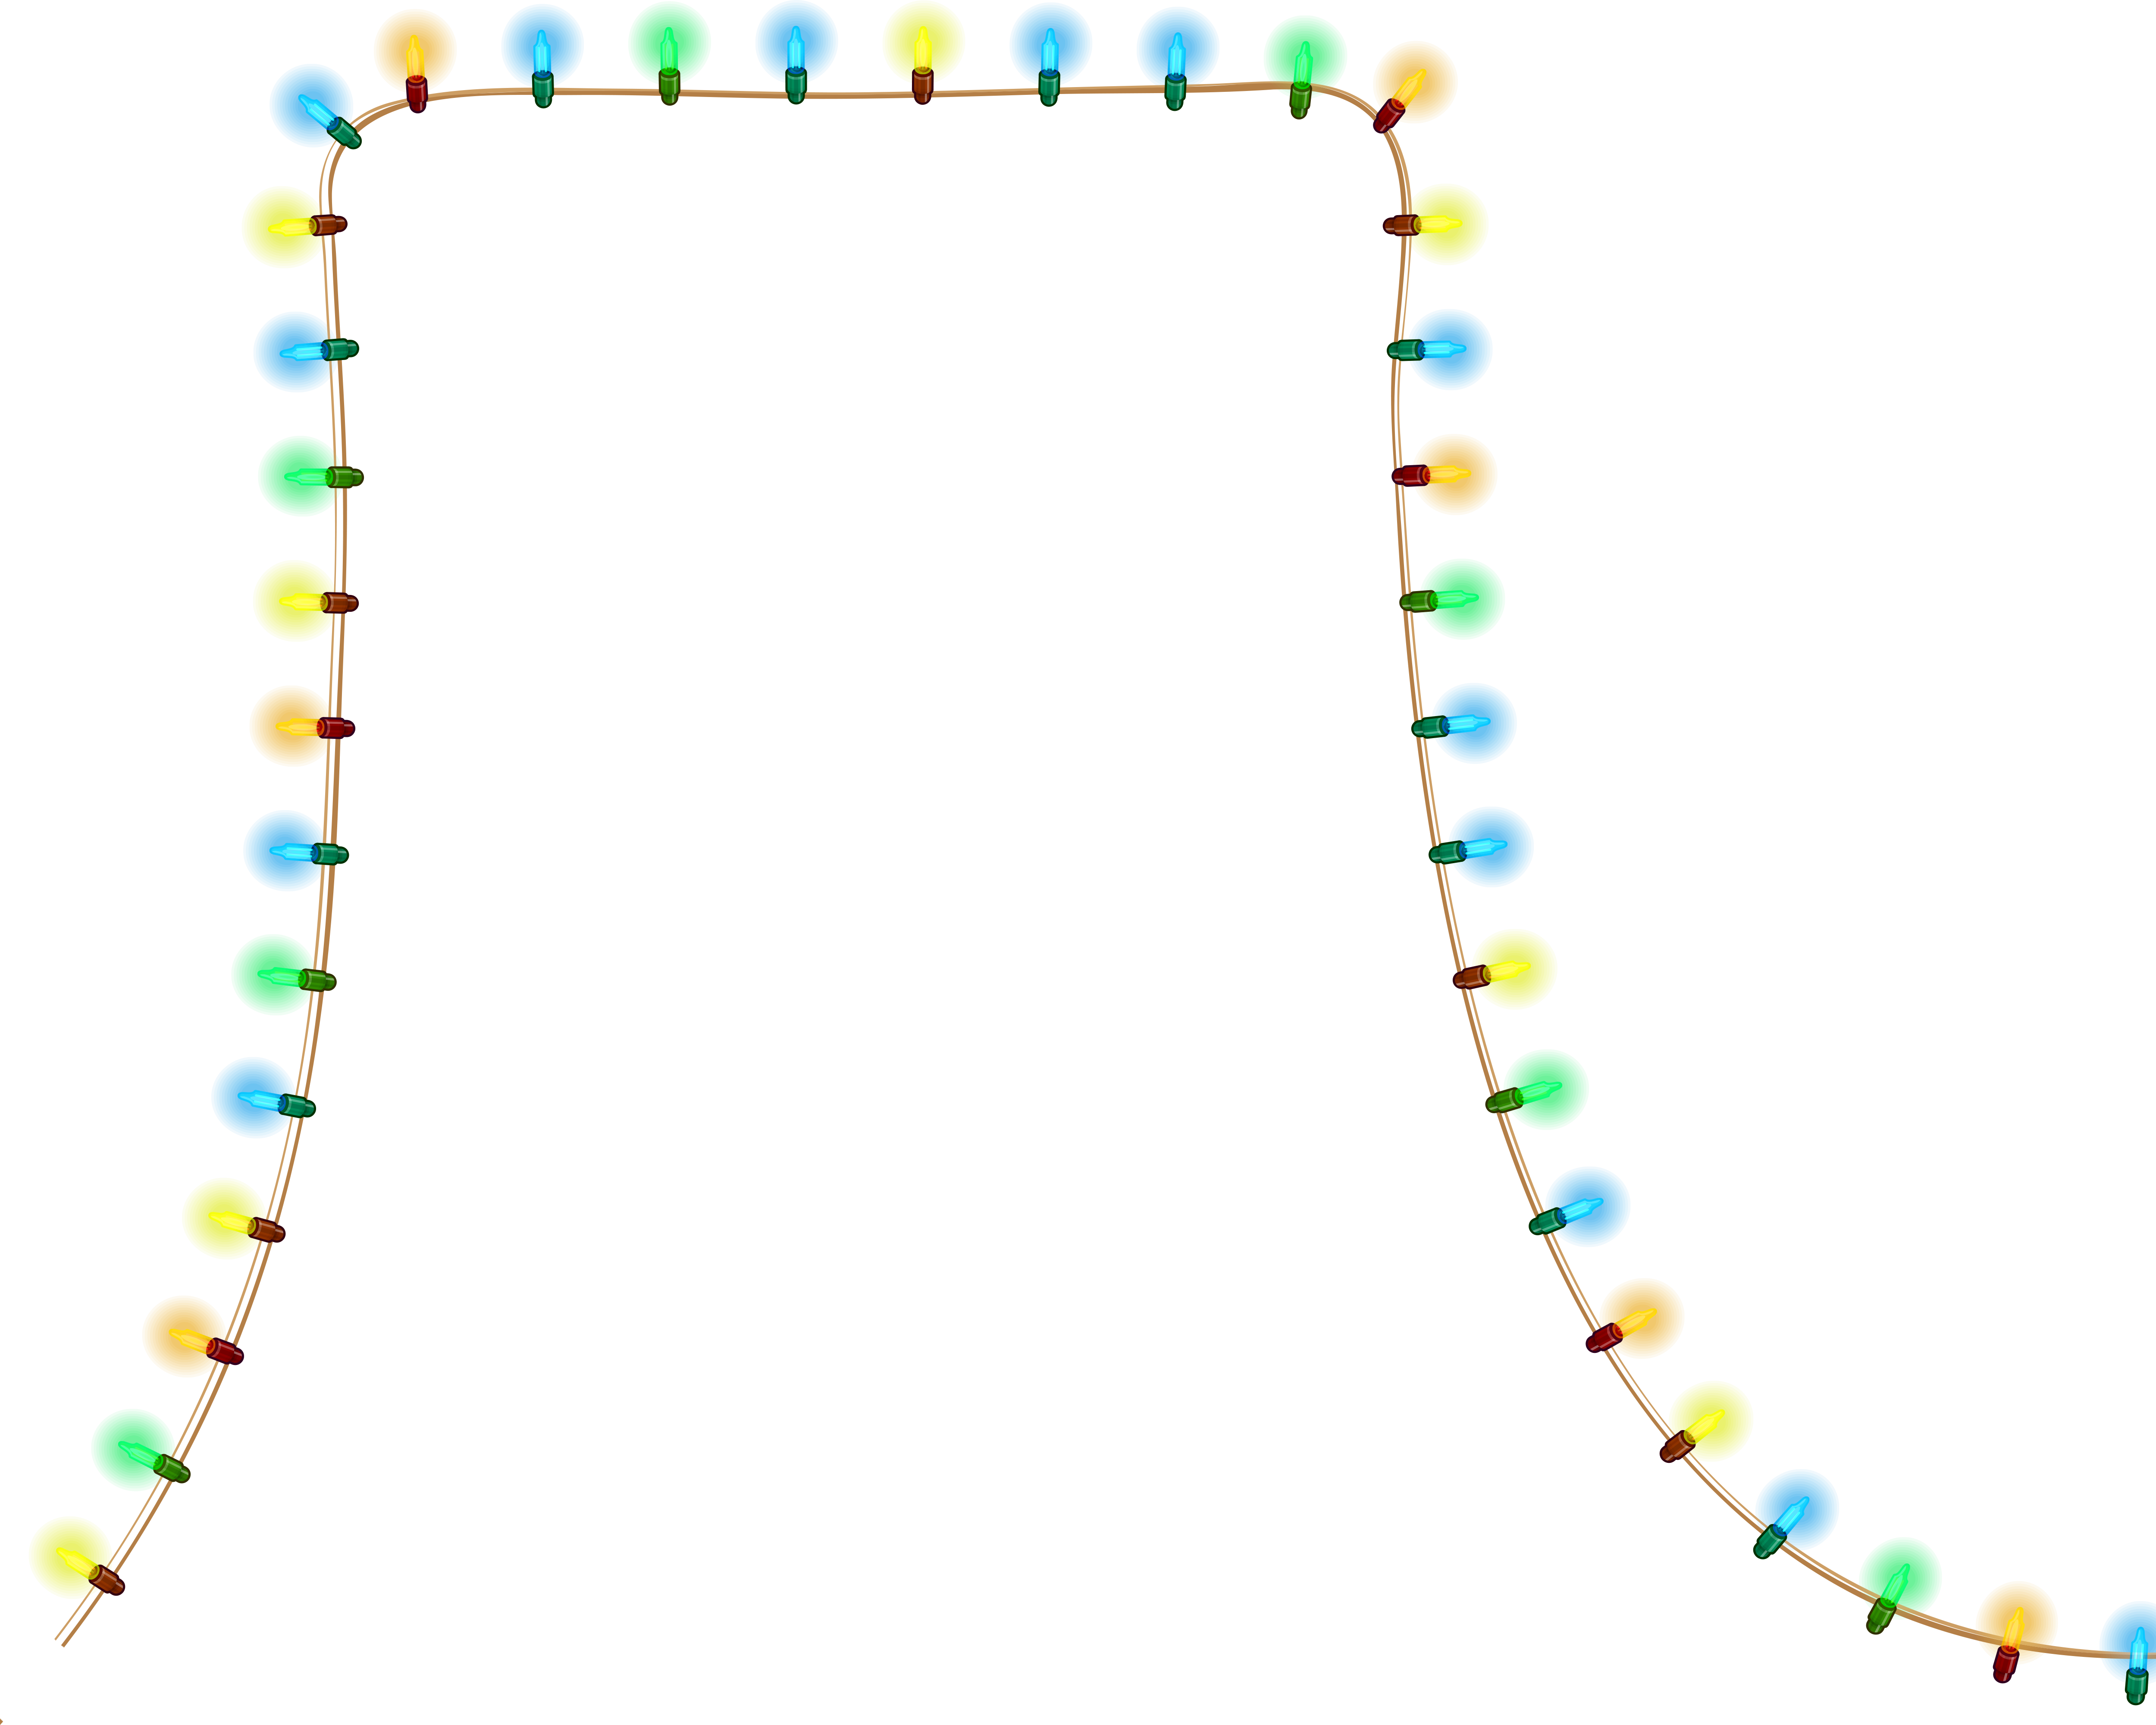 Christmas lights frame png. Transparent clipart picture gallery